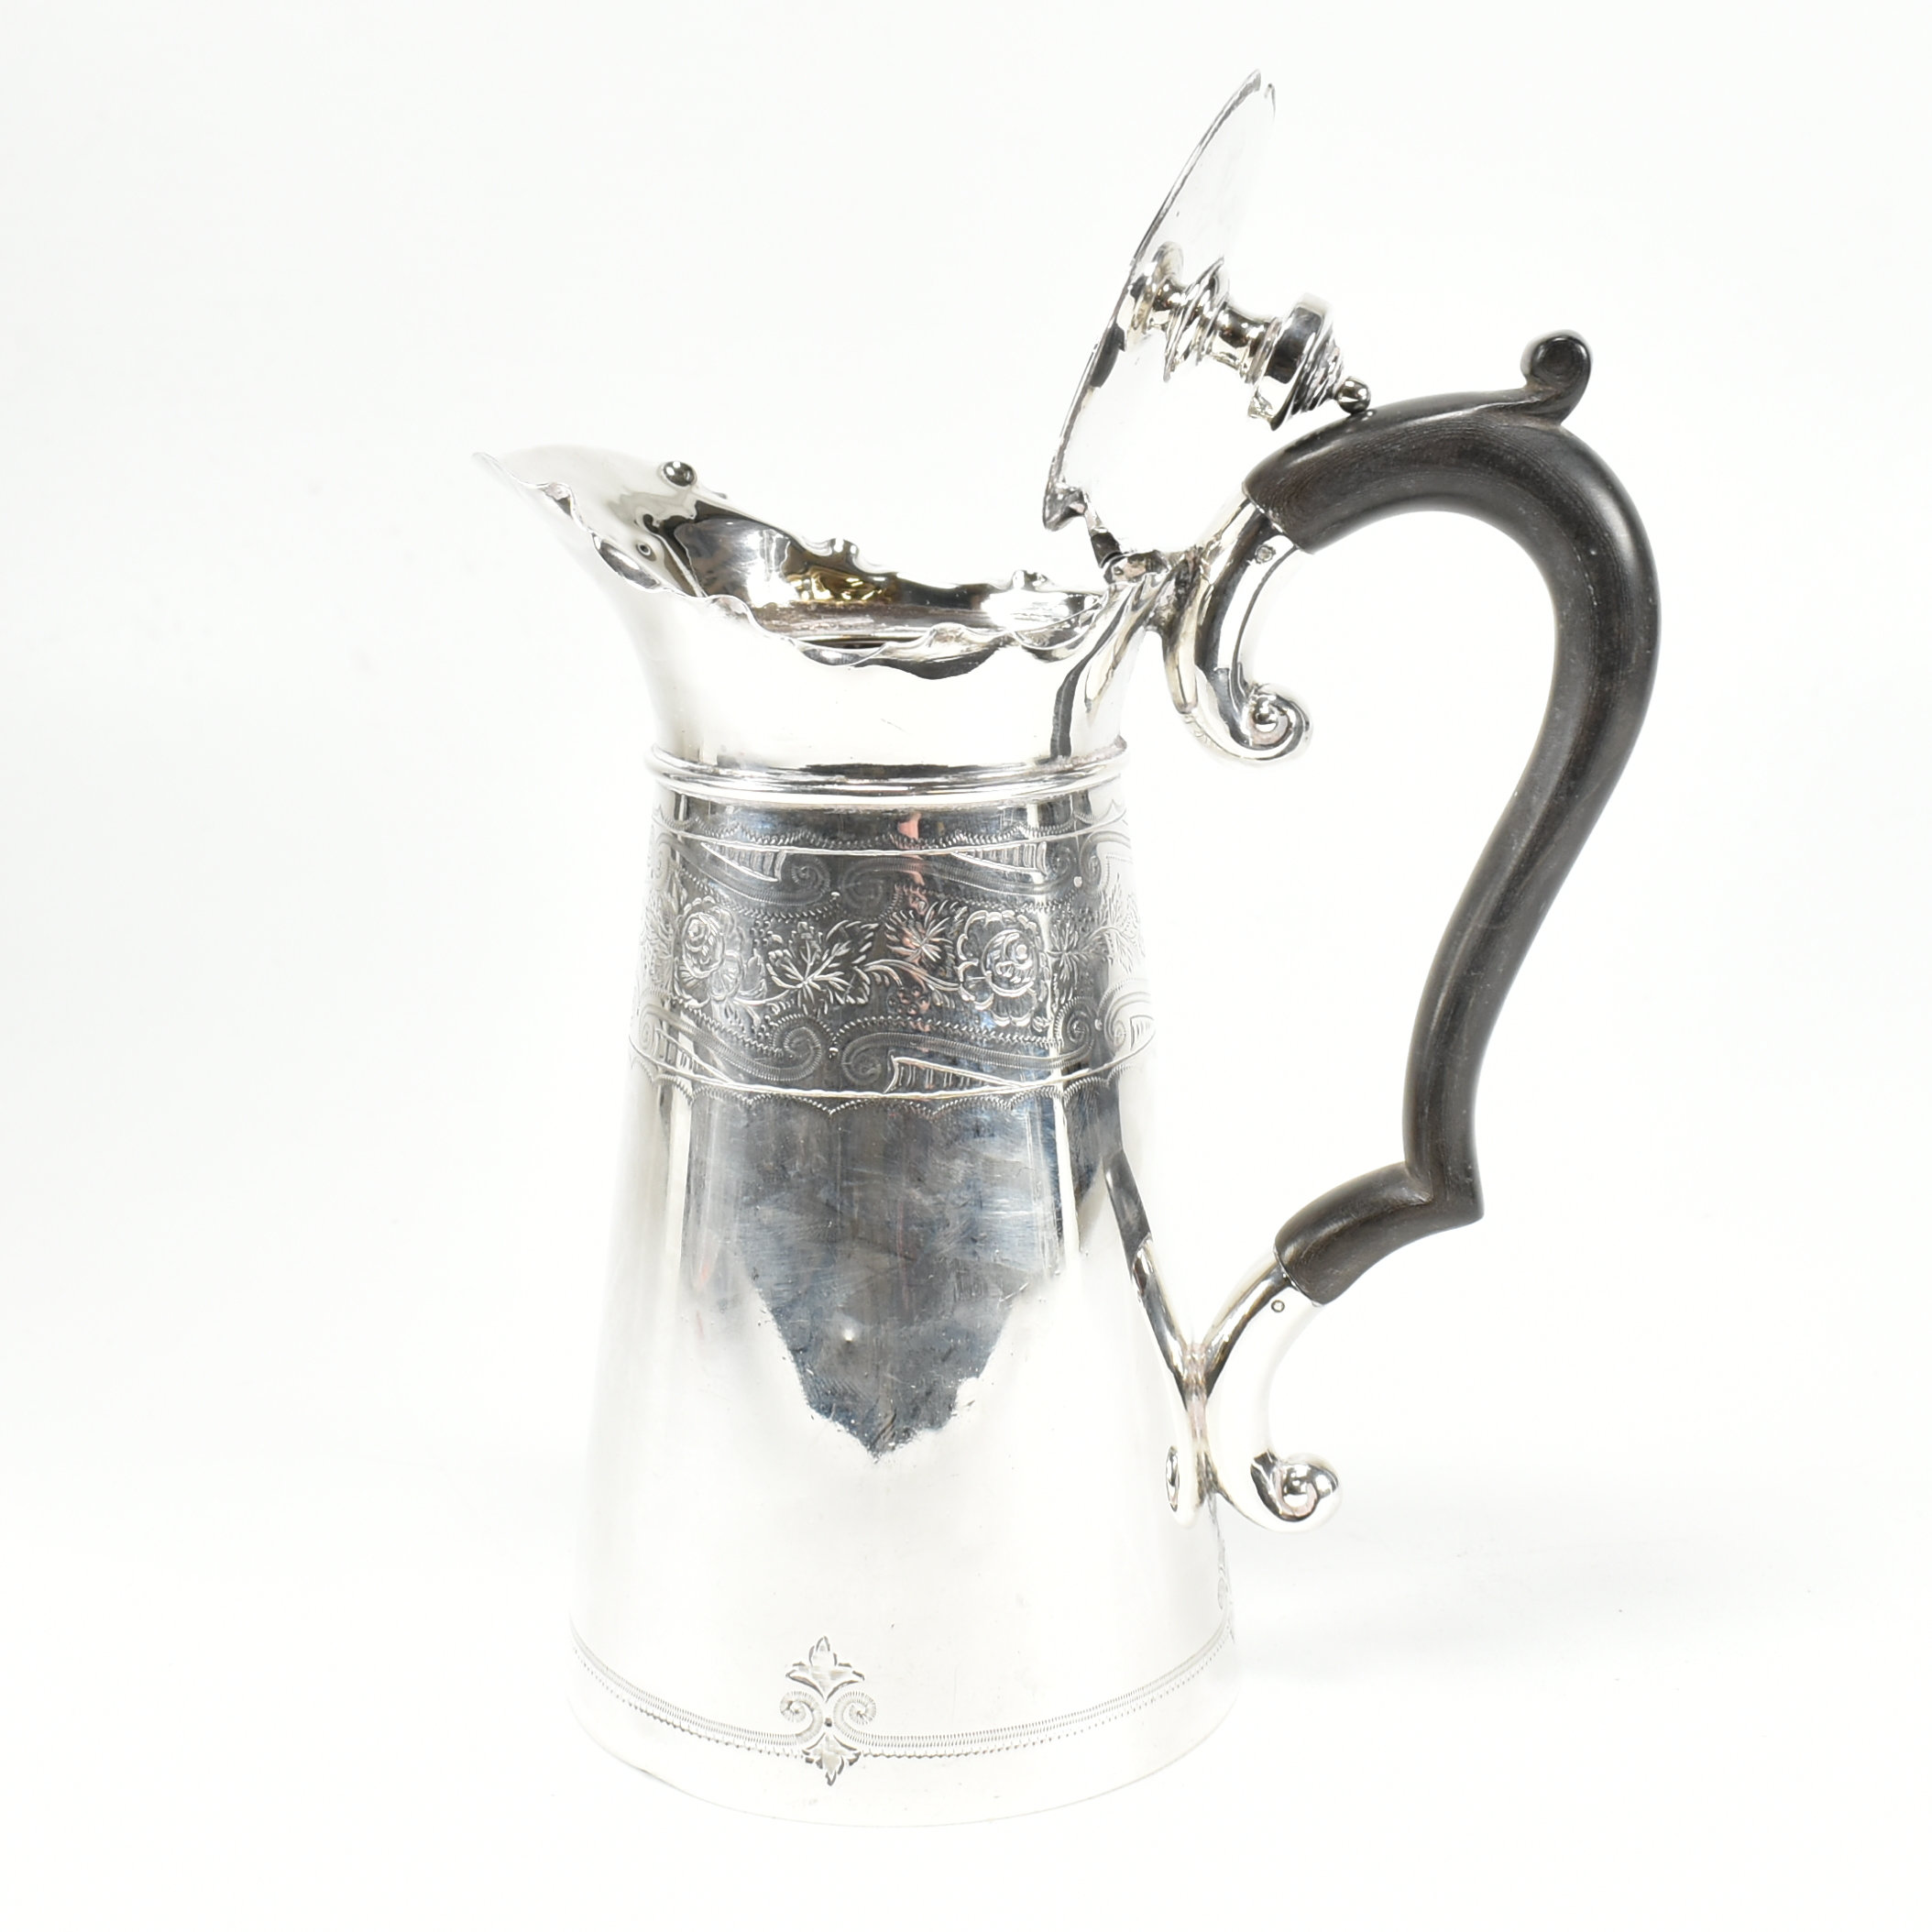 EARLY 20TH CENTURY HALLMARKED SILVER HOT WATER JUG - Image 4 of 9